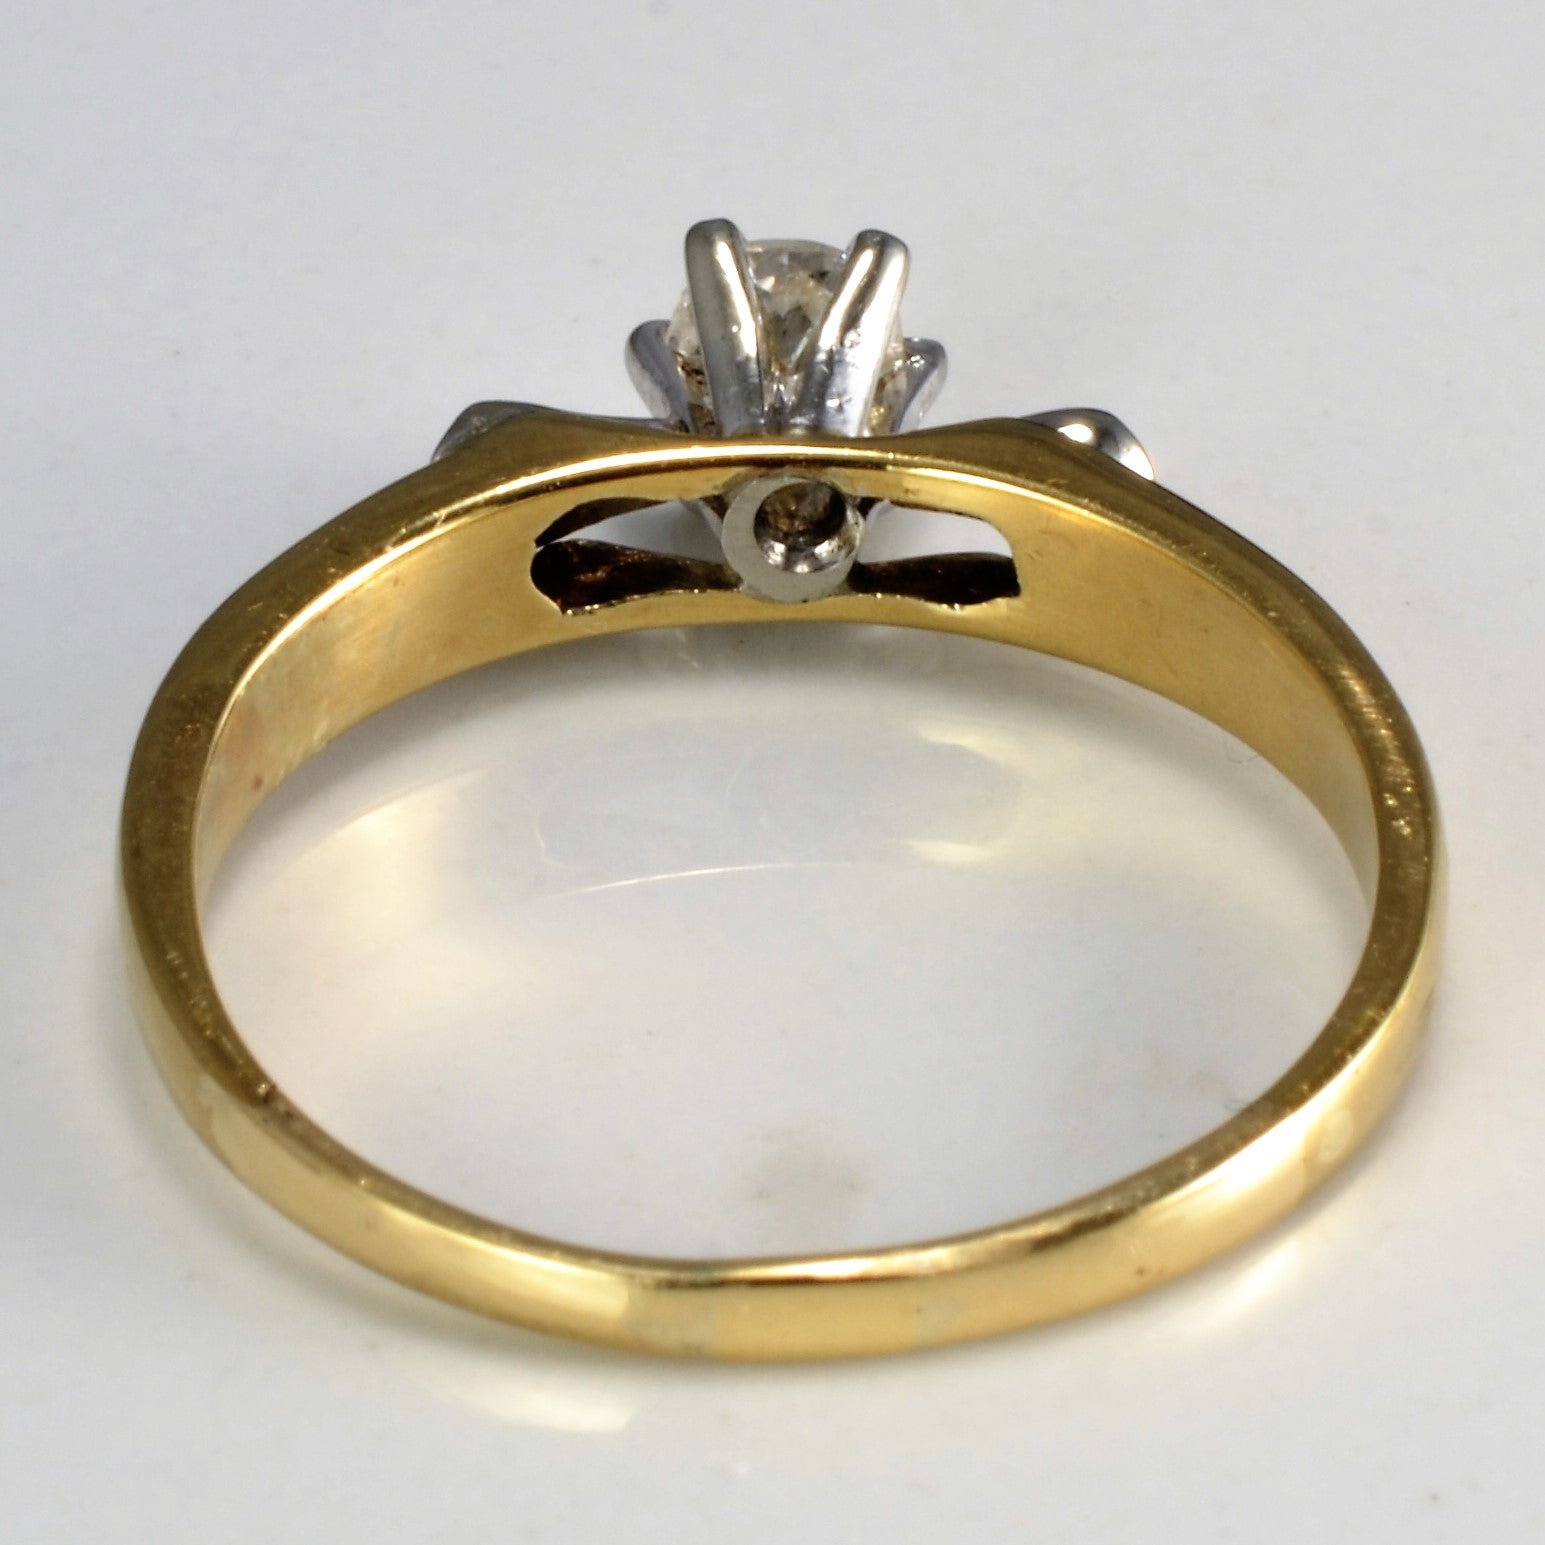 Solitaire Diamond Two Tone Gold Ring | 0.28 ct, SZ 8 |